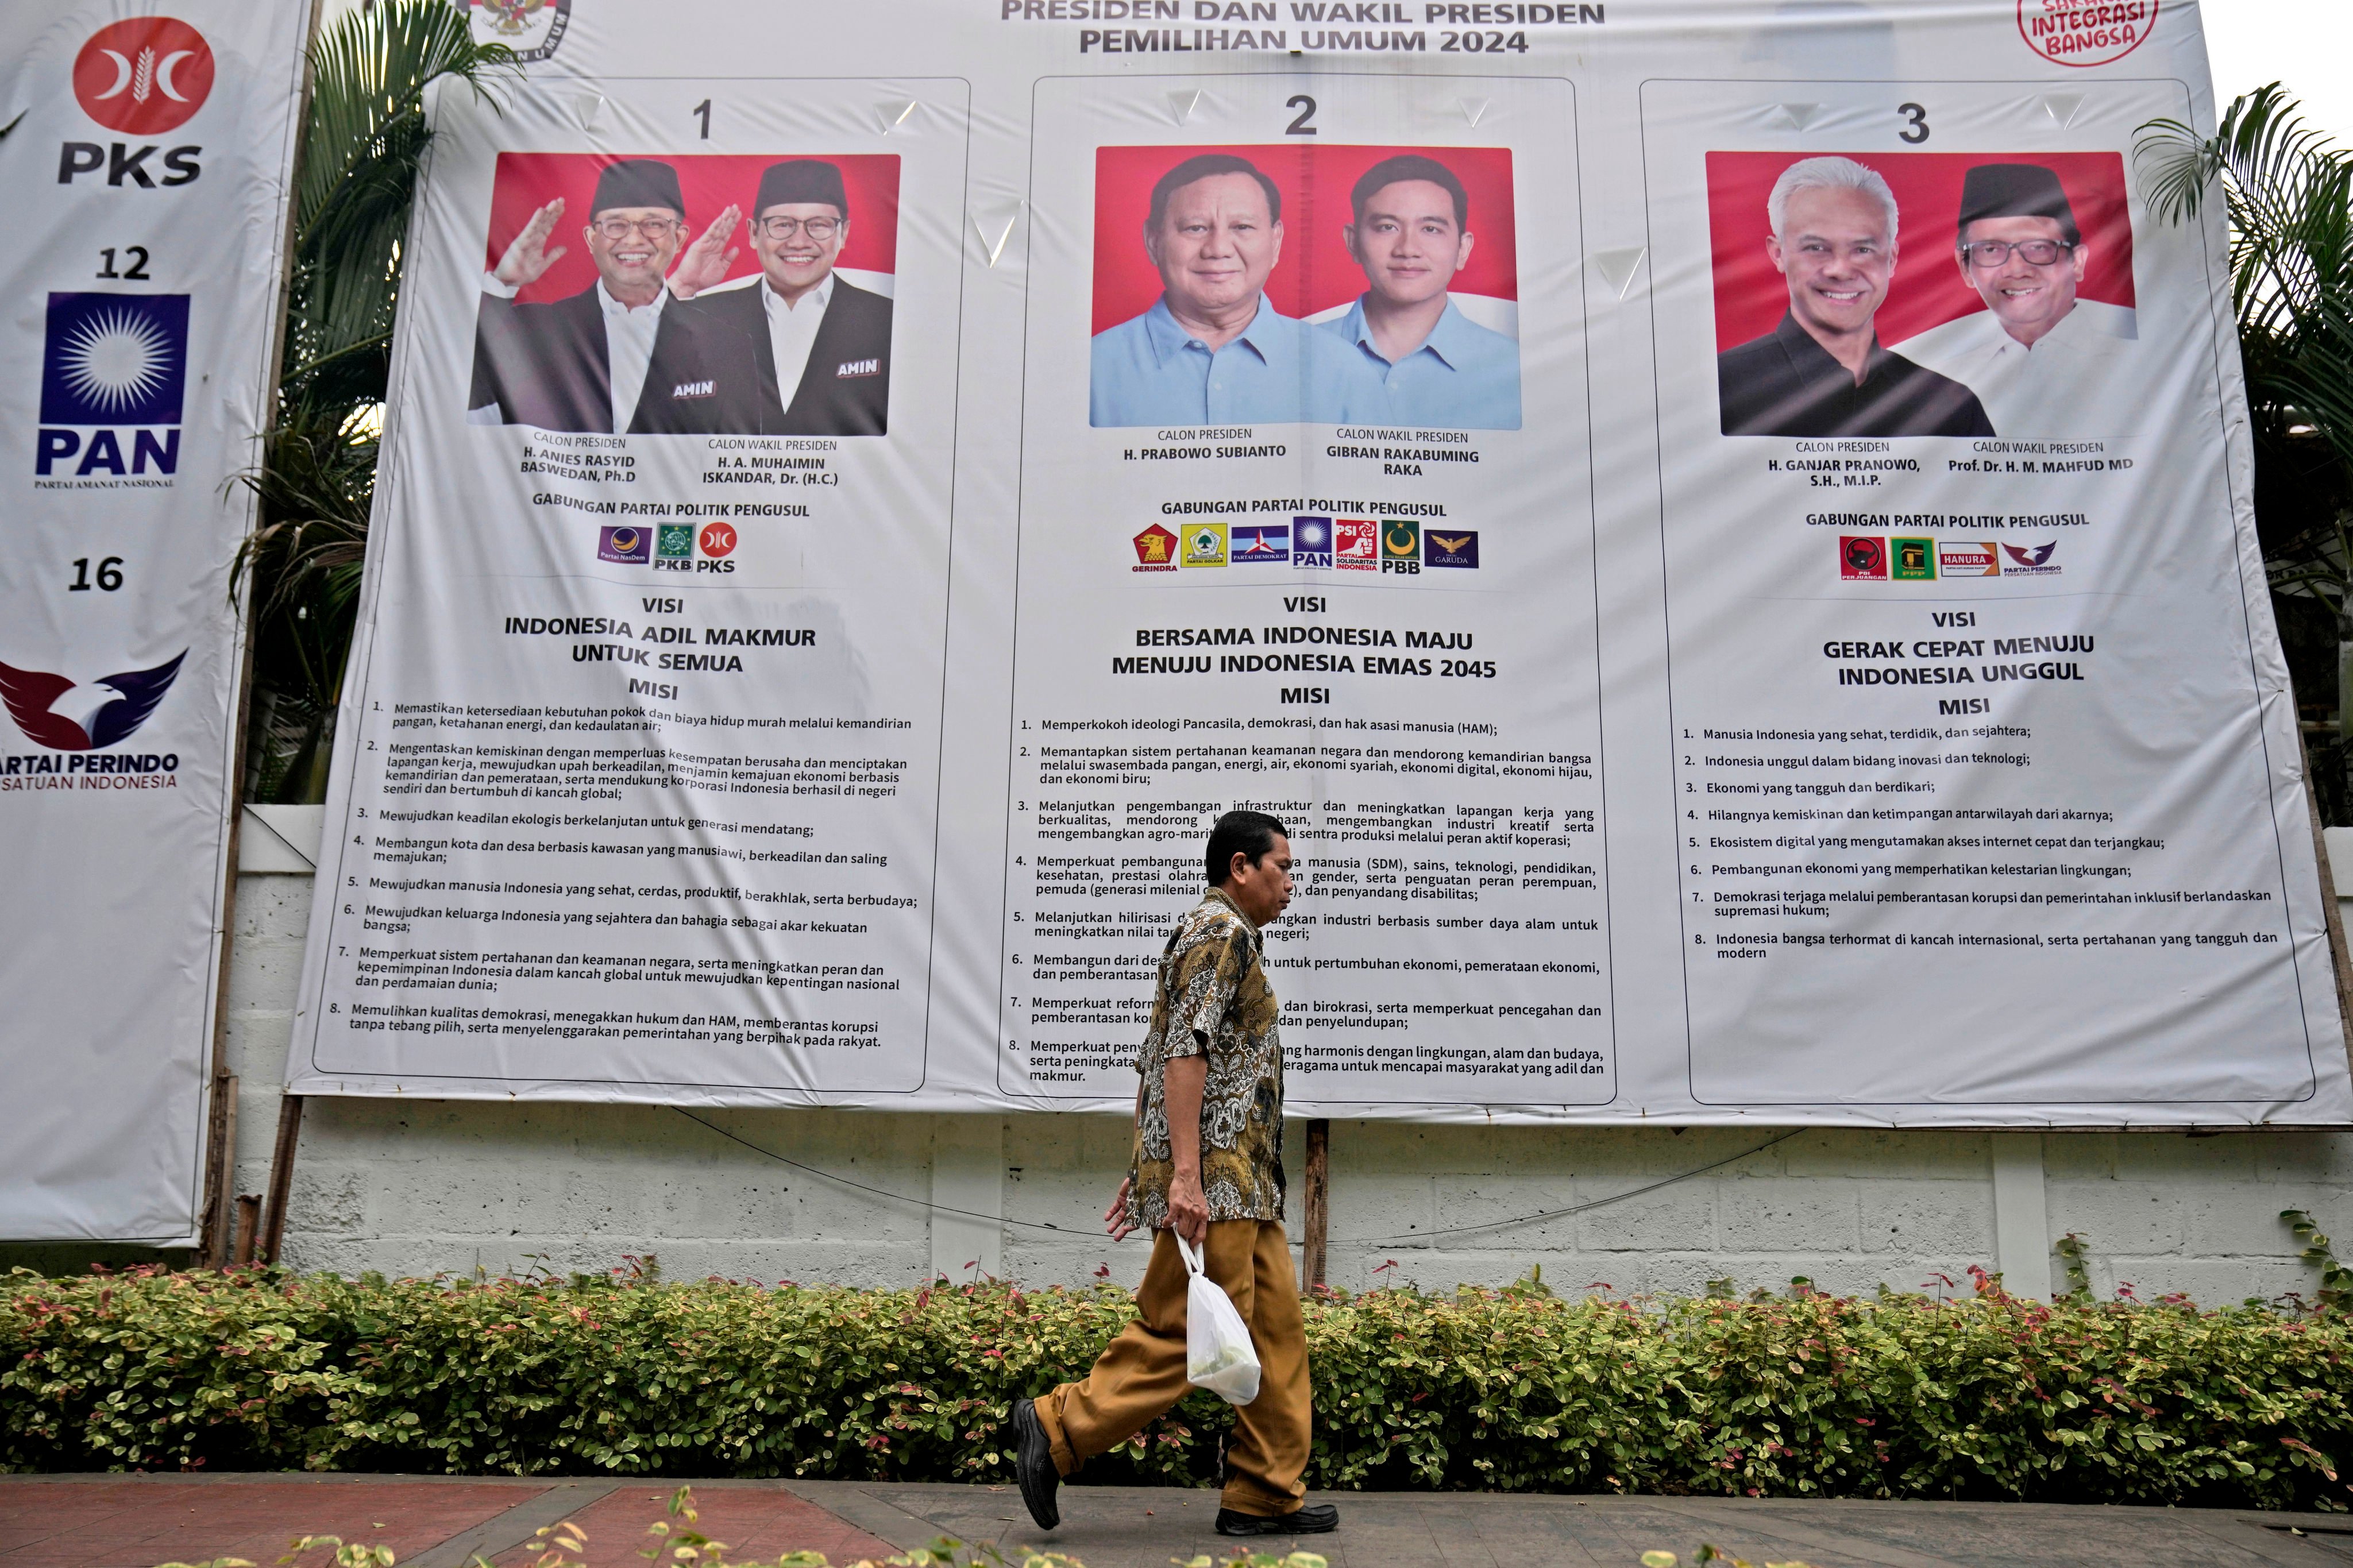 A man walks past an election banner in Jakarta introducing presidential candidates. Photo: AP